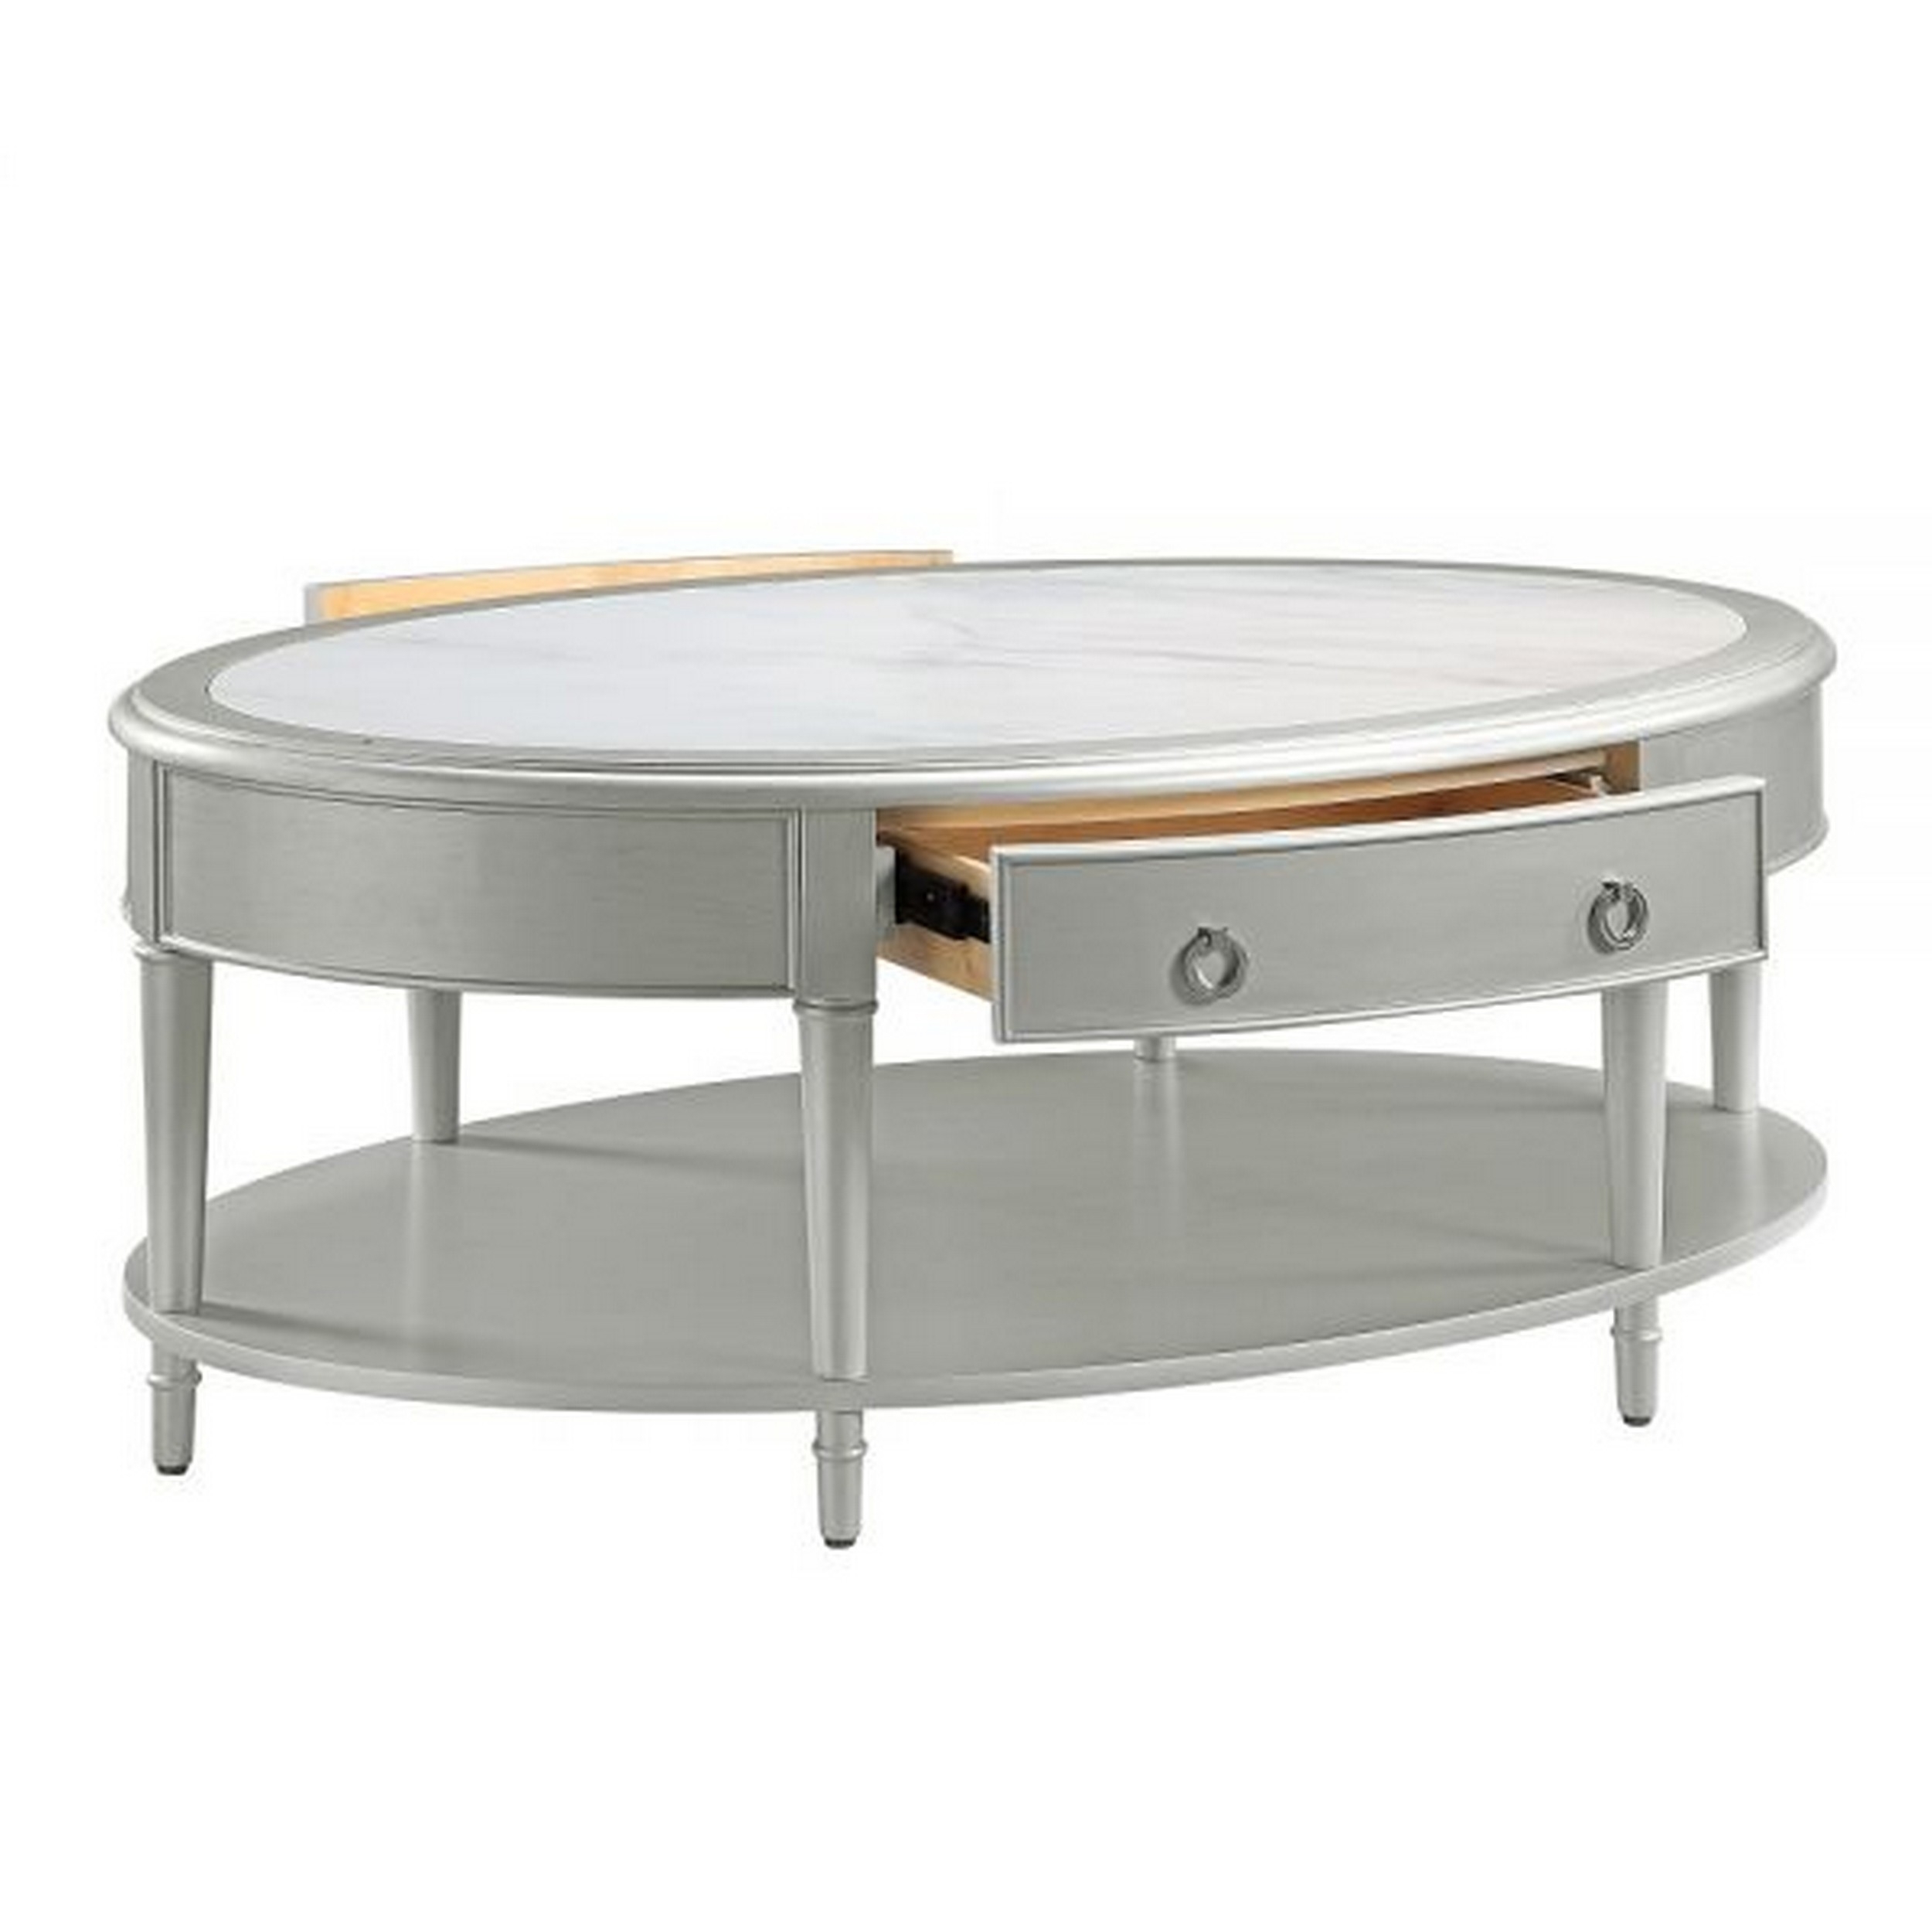 Kyna 50 Inch Coffee Table, Sintered Top, 1 Drawer, Classic Oval, Silver - Saltoro Sherpi